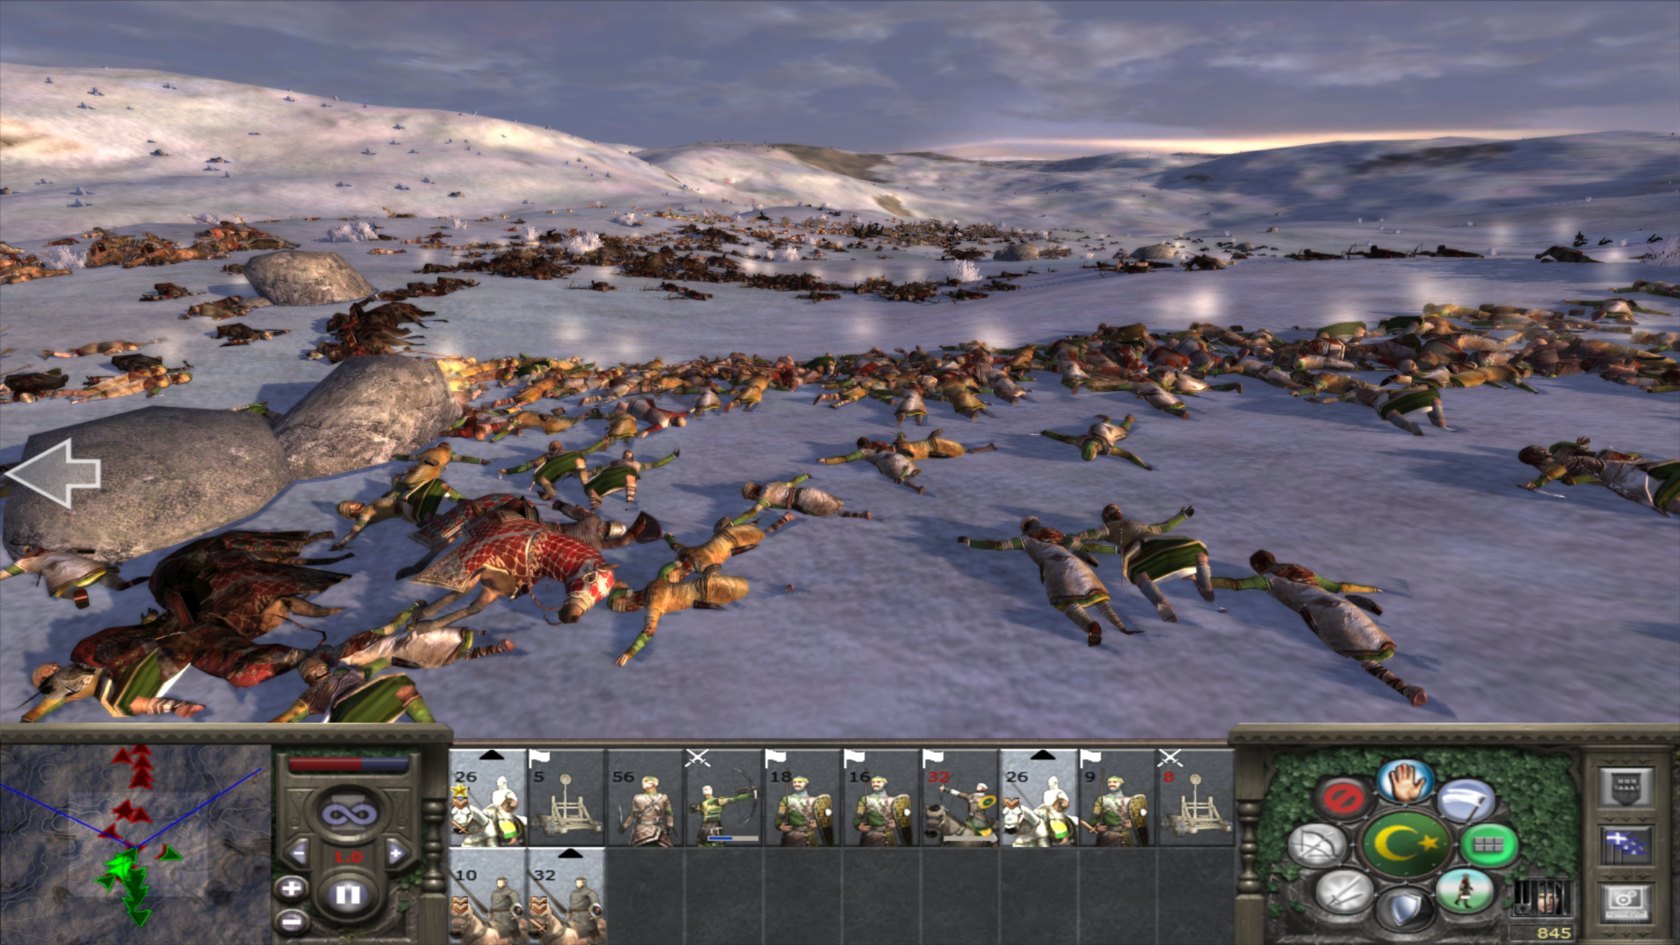 Medieval II: Total War High Quality Background on Wallpapers Vista